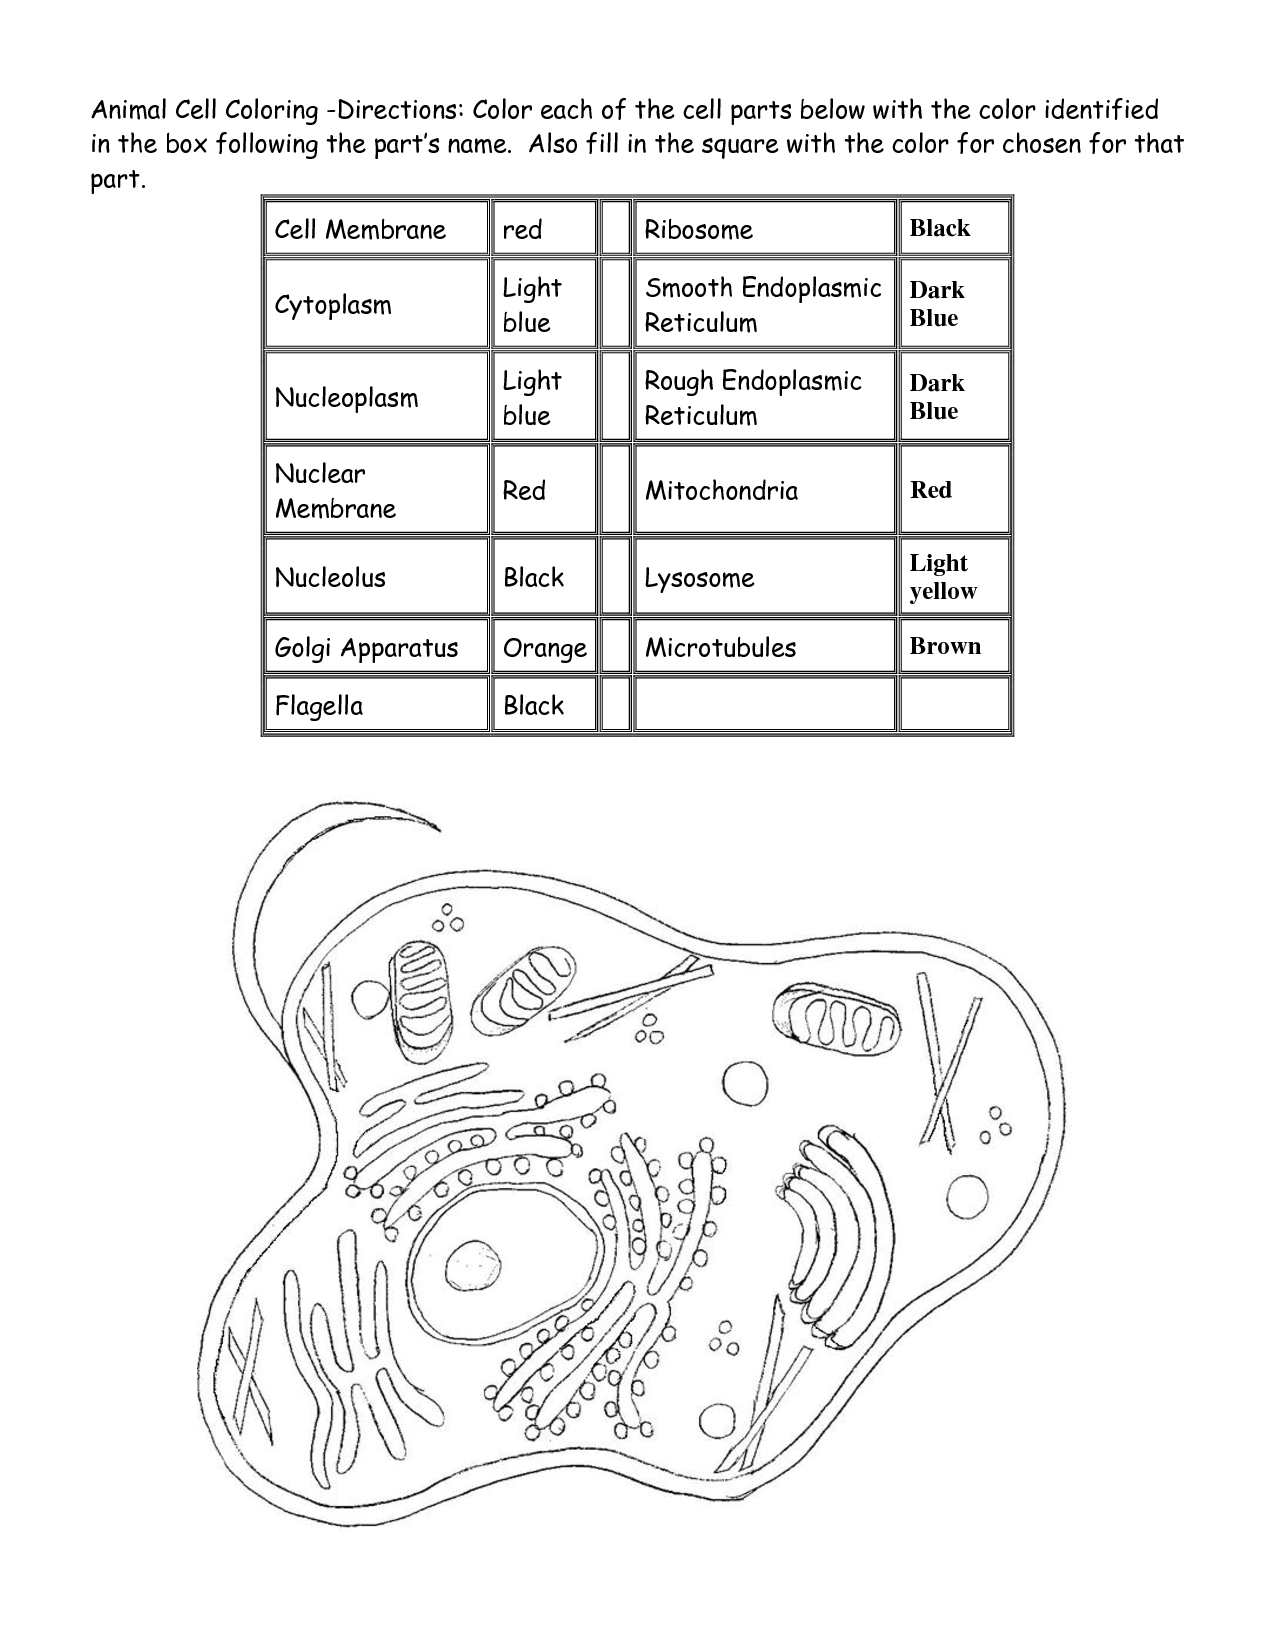 animal cell coloring page biology coloring pages worksheets asu ask a biologist cell page coloring animal 